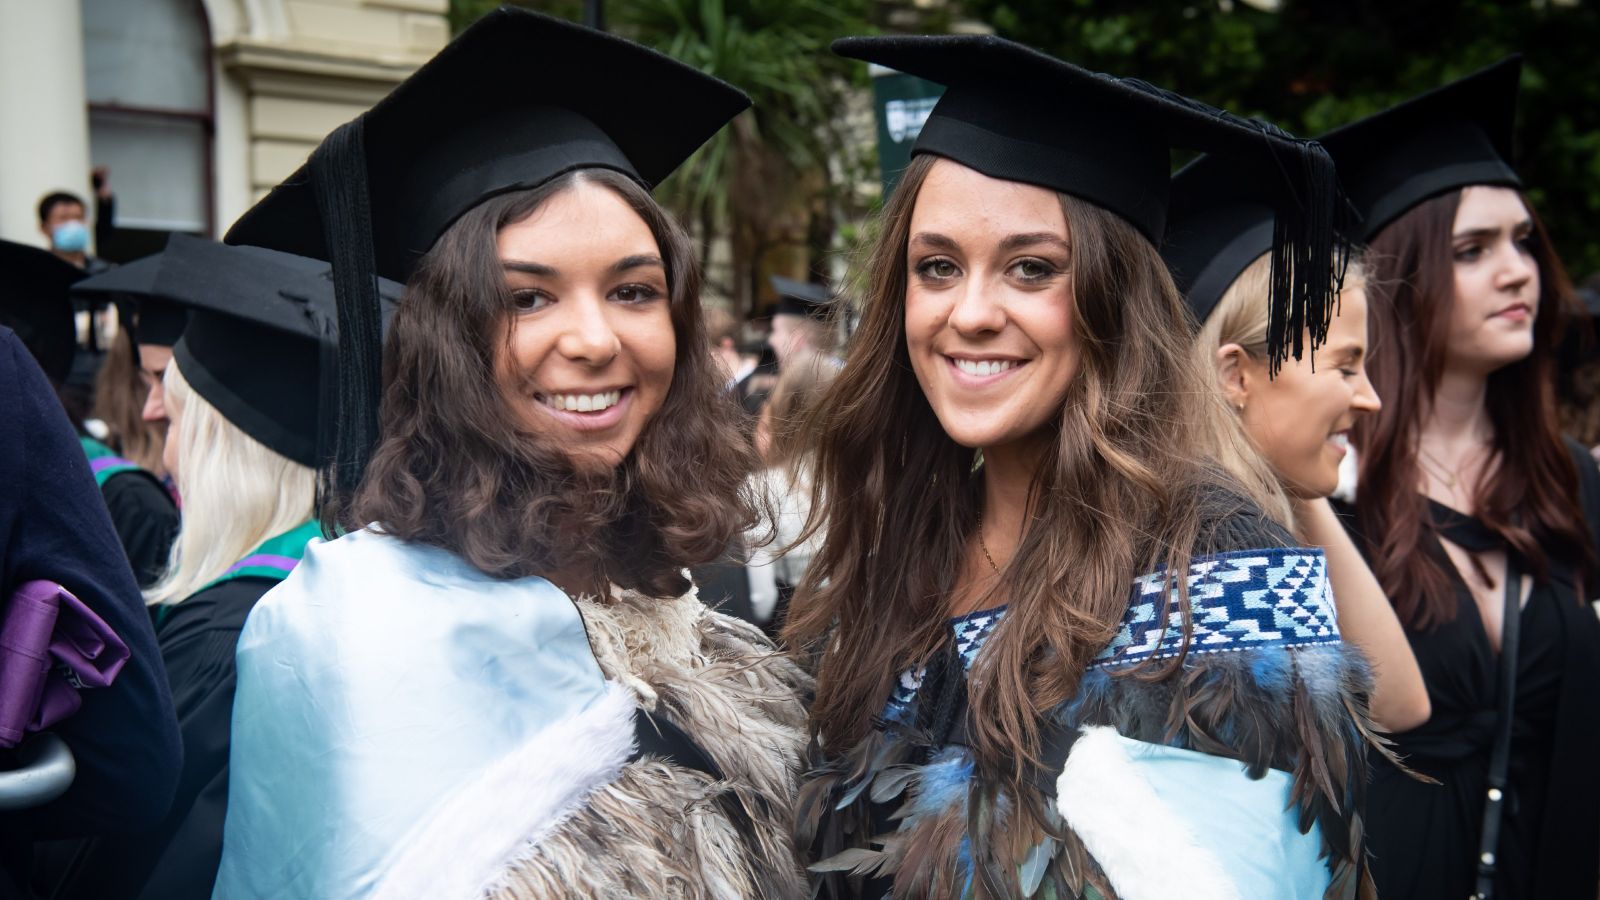 Two young Māori women wearing academic dress and traditional cloaks.